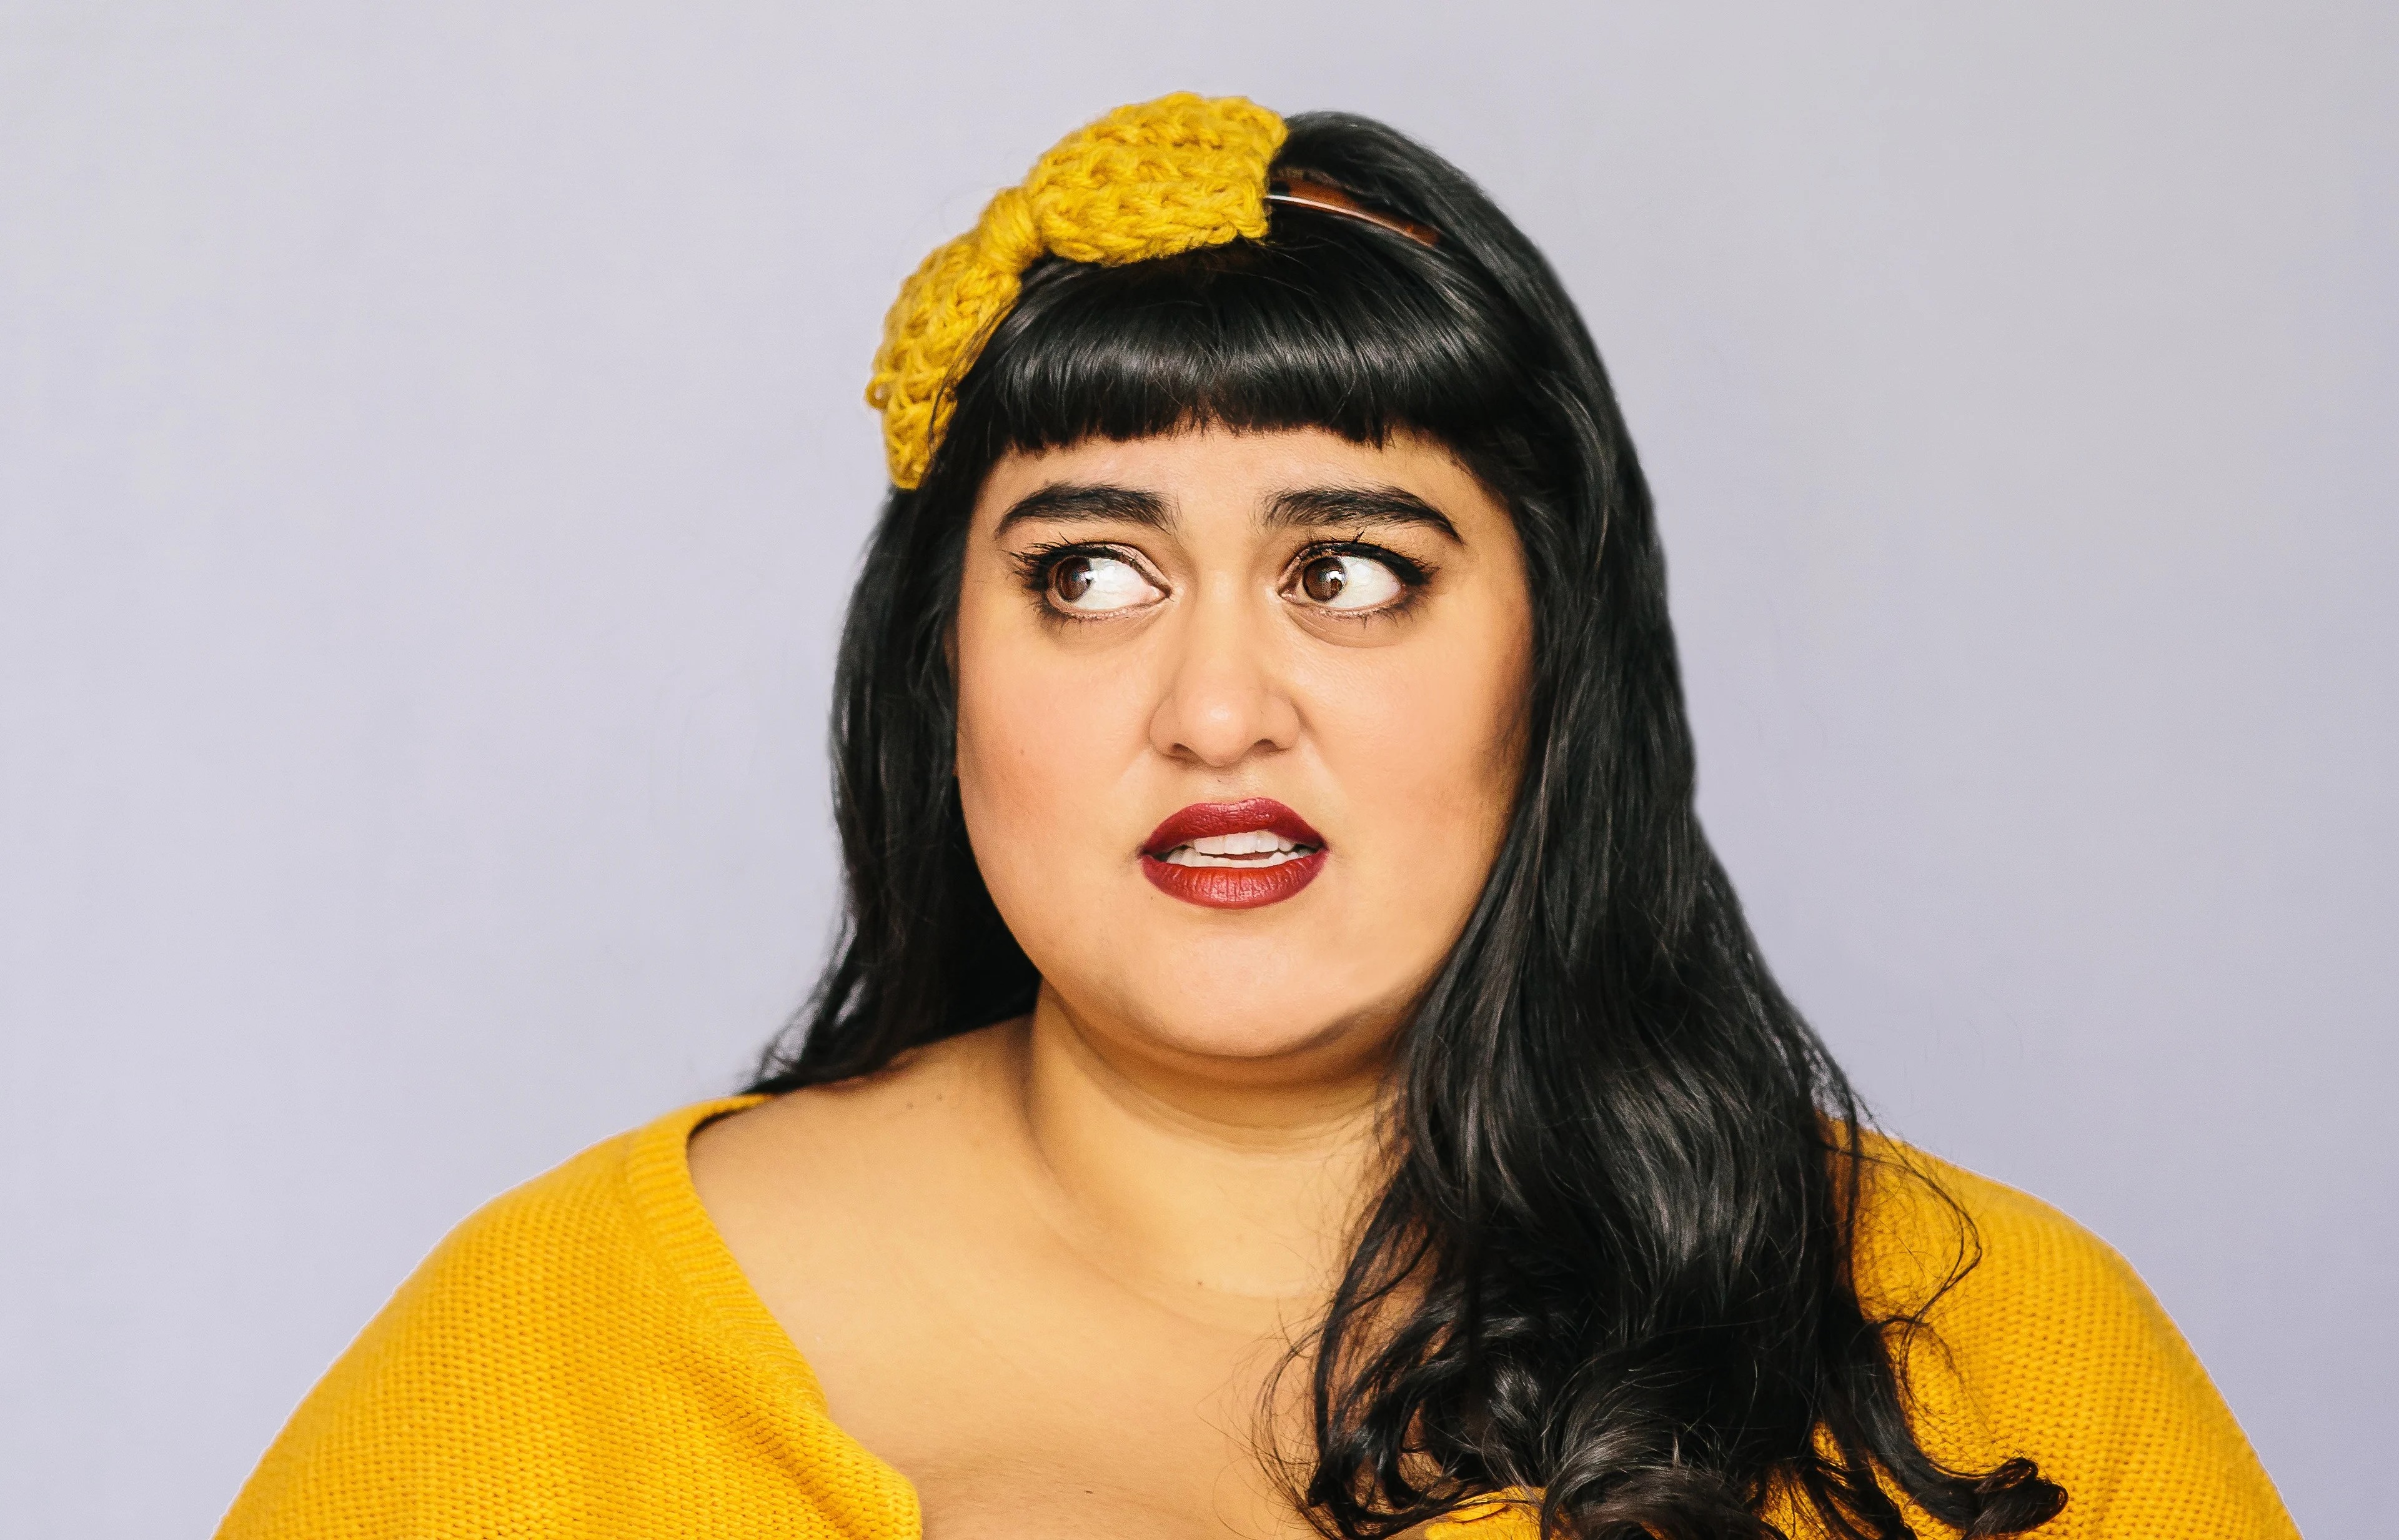 Close-up of a woman with a knitted yellow bow in her black hair and a matching sweater, looking to her right.